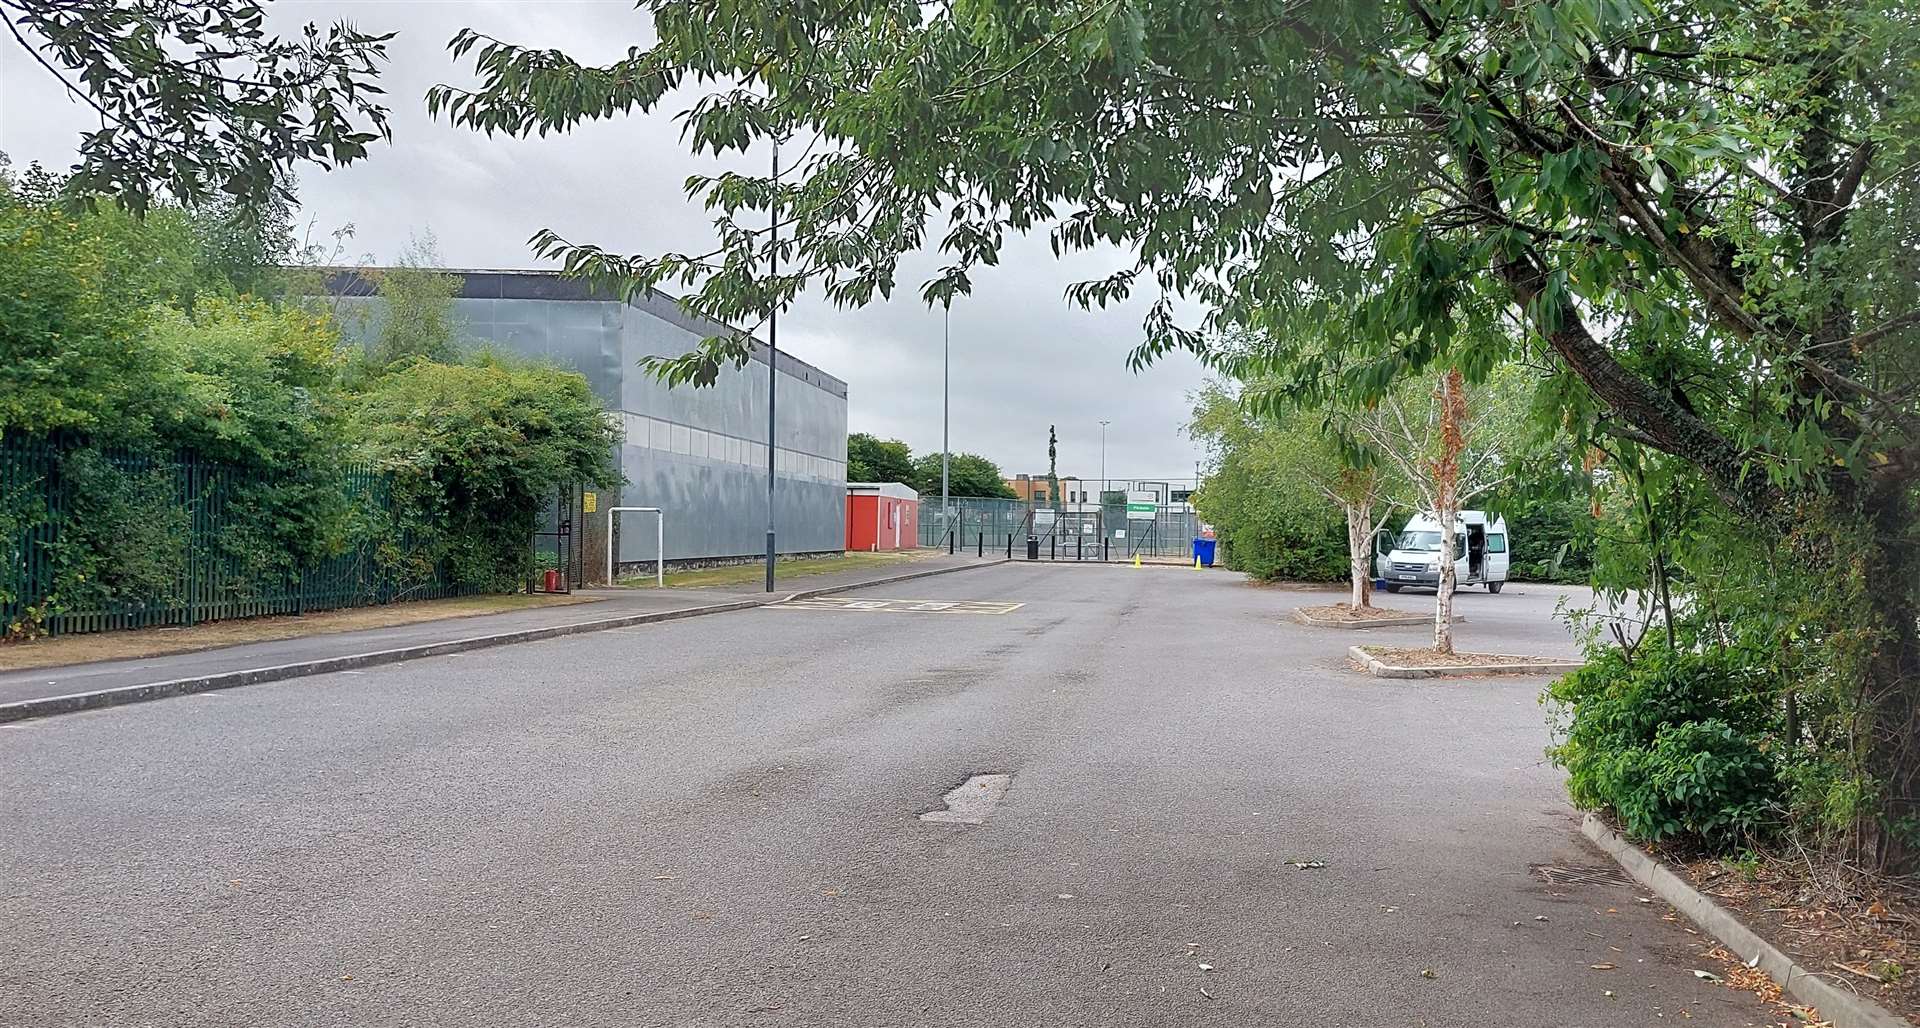 The Stanhope Road facility has netball courts and football pitches